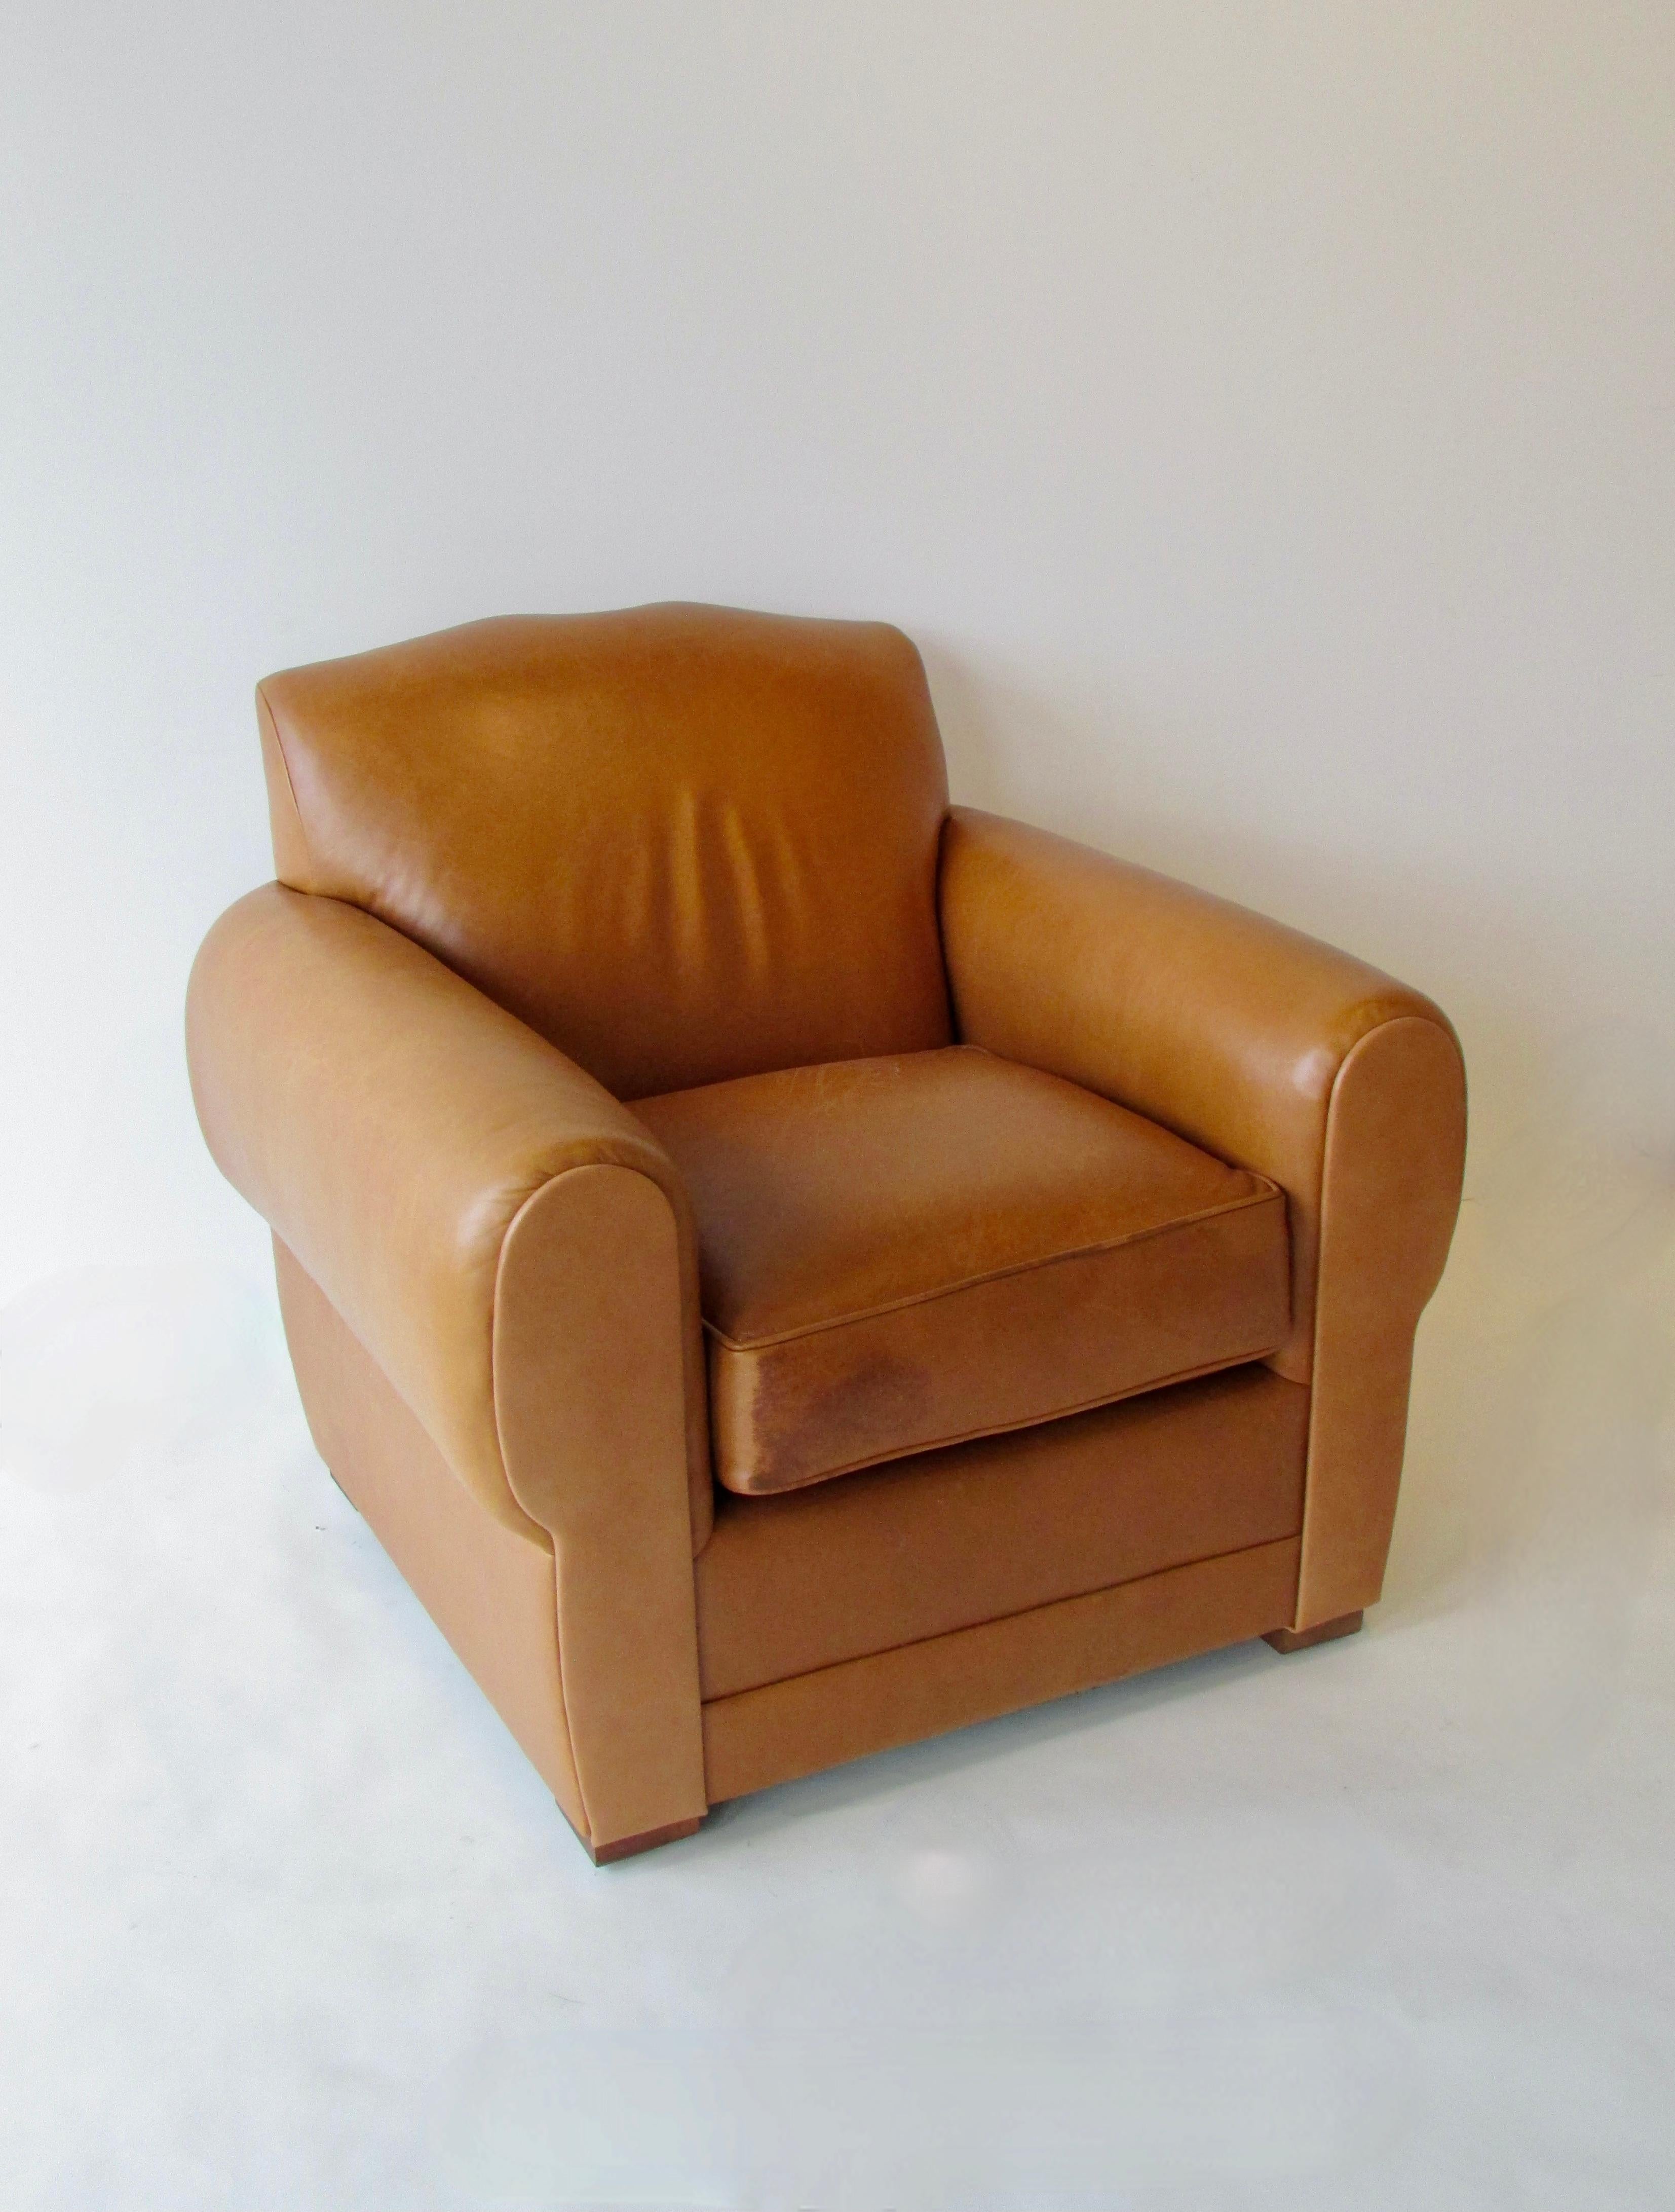 20th Century Ralph Lauren Fench Art Deco Style Leather Club or Lounge Chair for Henredon